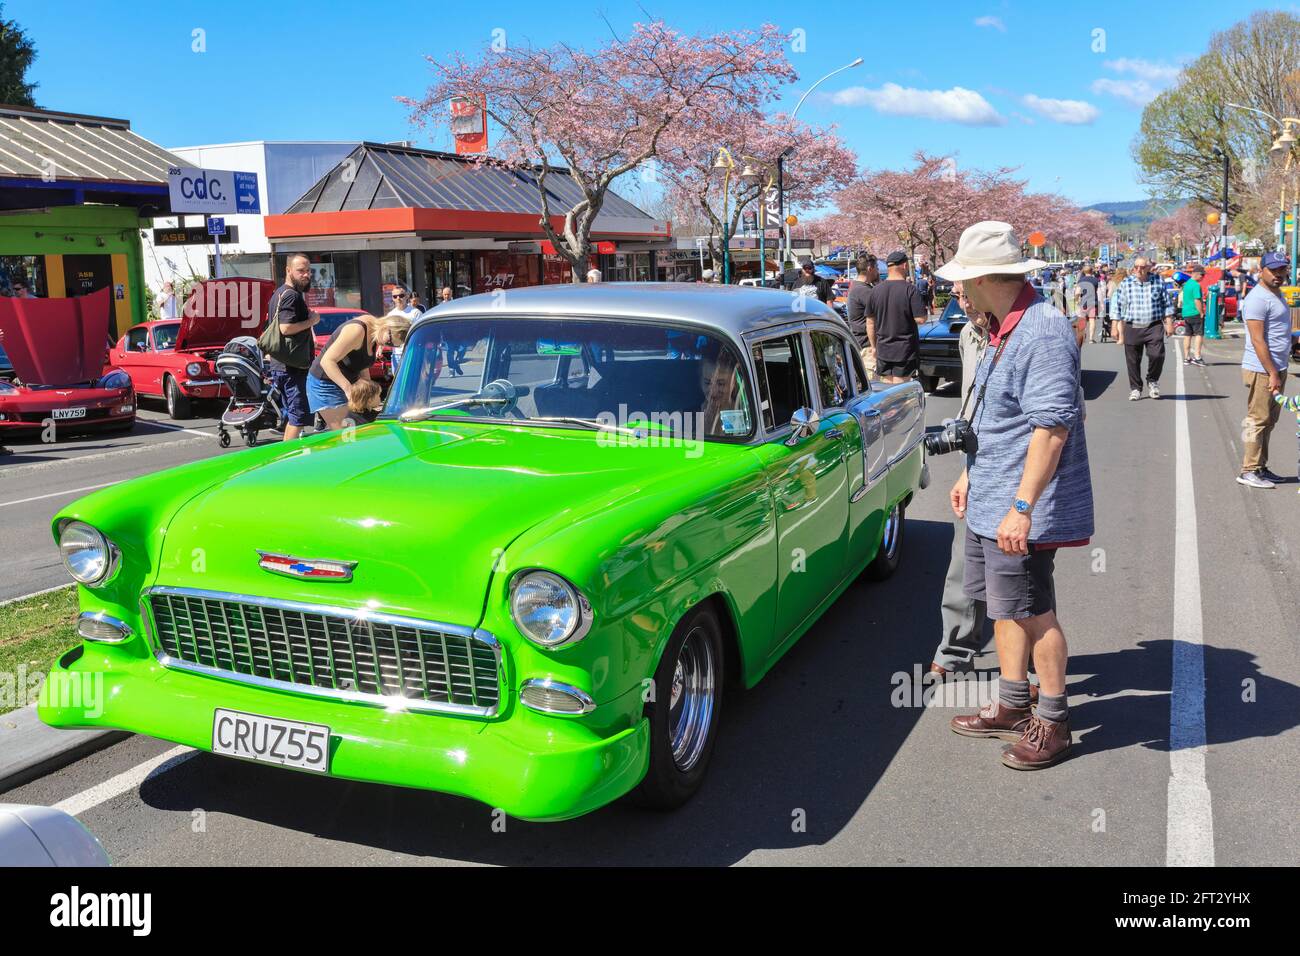 A 1955 Chevrolet 150 with vivid green paint at a classic car show. Tauranga, New Zealand Stock Photo